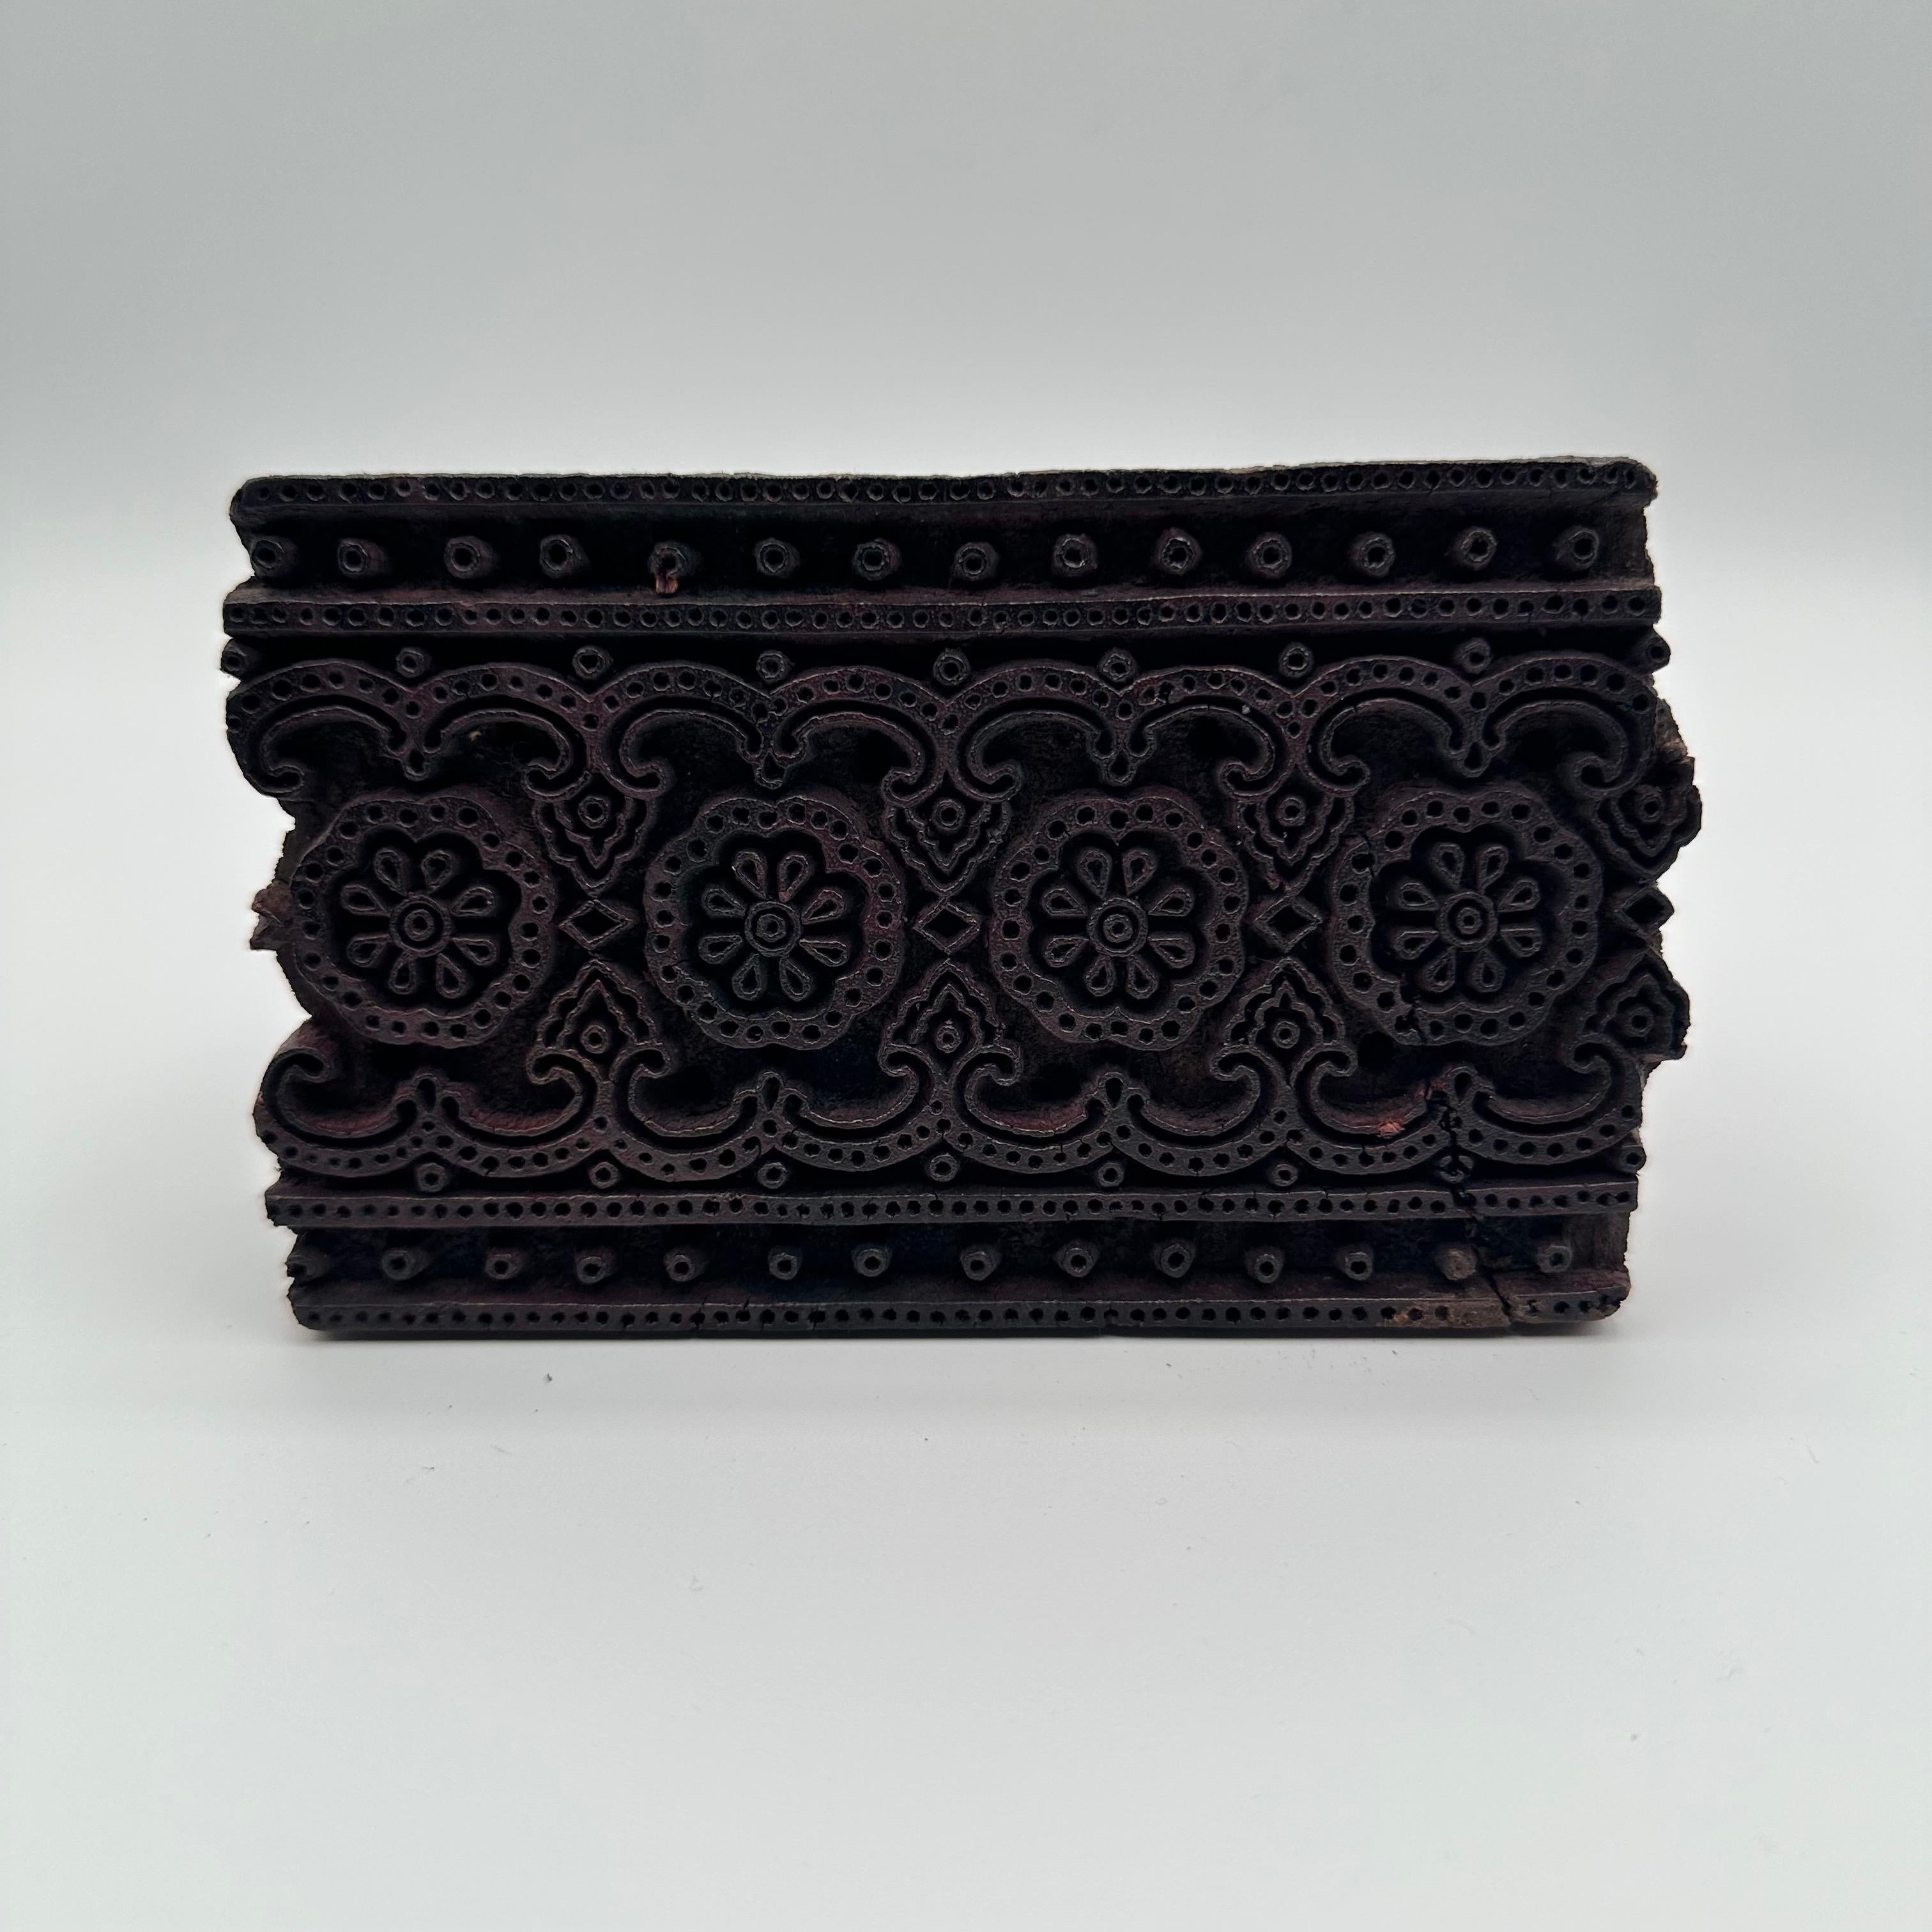 Antique Hand Carved Wood Printing Block in Dark Rosette Pattern For Sale 7